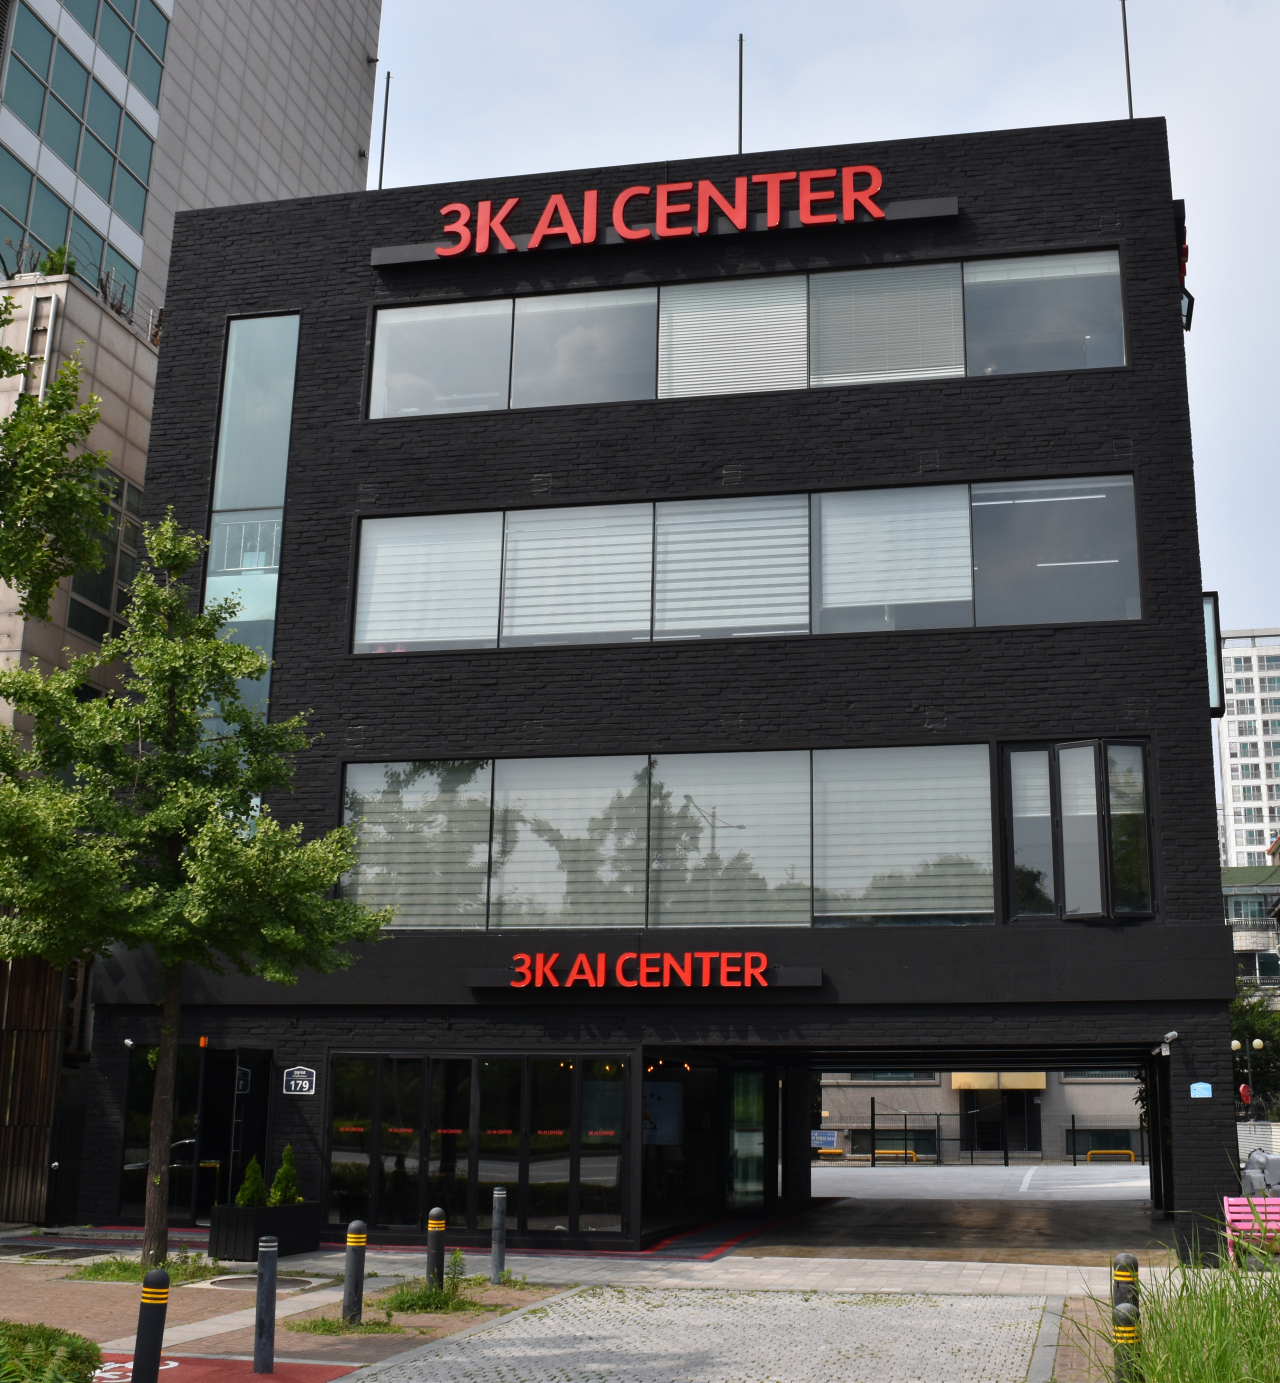 A picture of 3K Group’s “3K AI Center,” a four story building located in Jamsil, Seoul (3k Group)